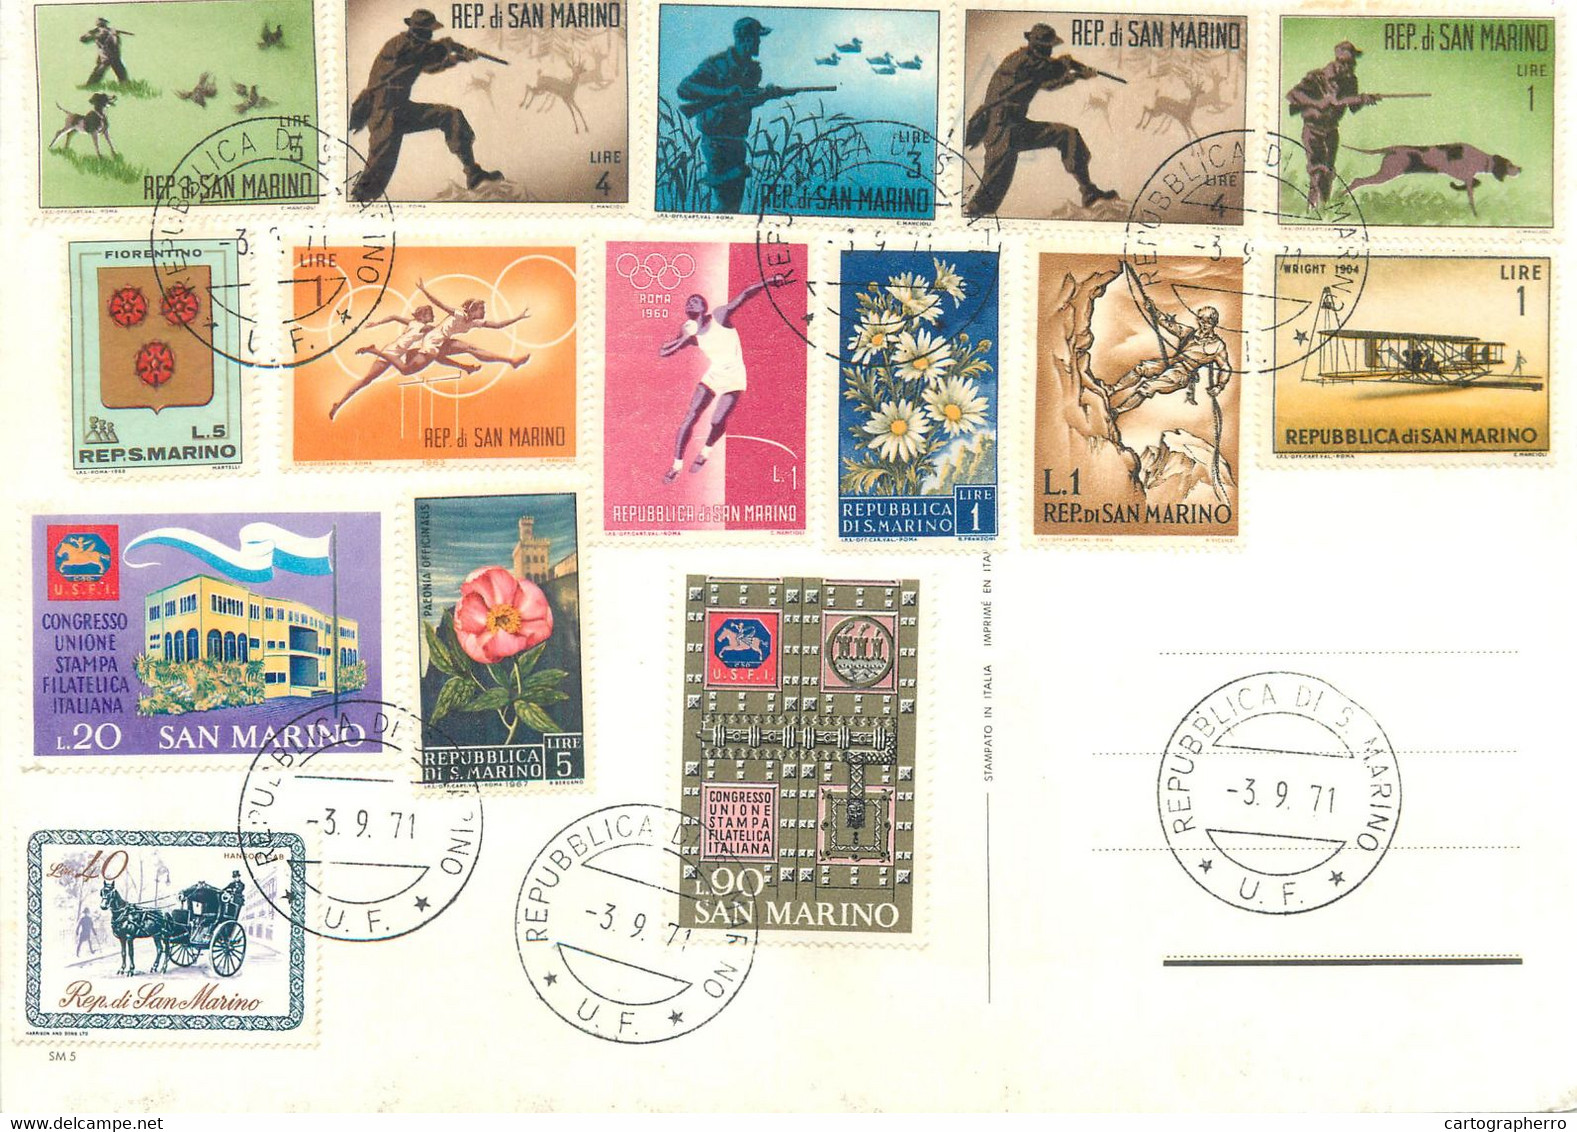 Lot 3 Extra Size Postcards SAN MARINO Atypical 13 X 19 Cm Multi Nice Franking Stamps Local Motifs Sports & Fauna Topical - Used Stamps